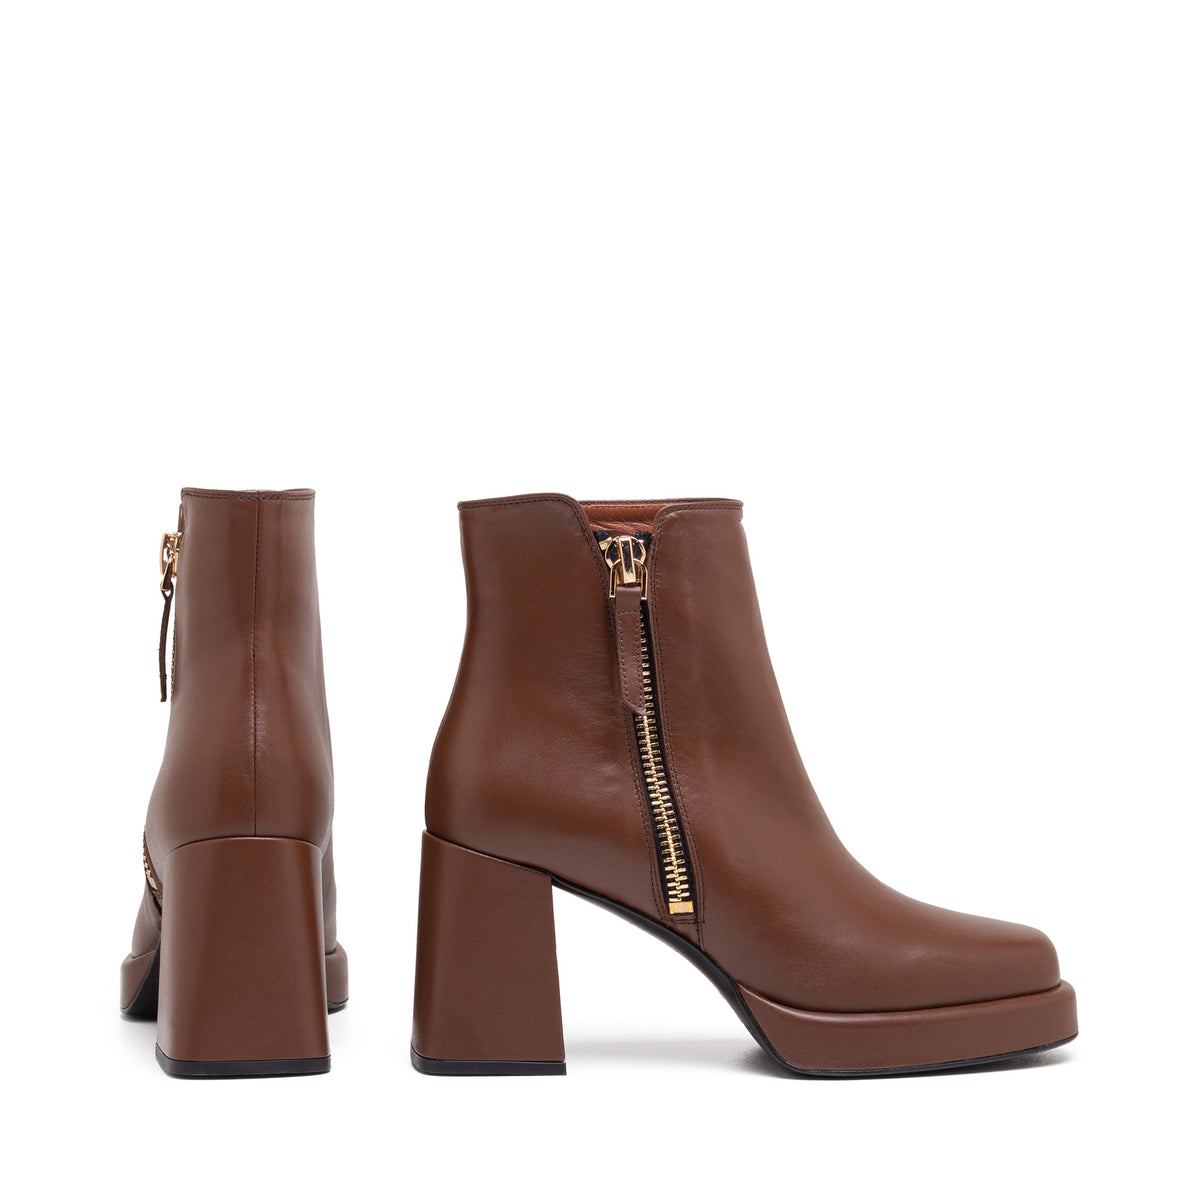 GINEVRA ANKLE BOOTS